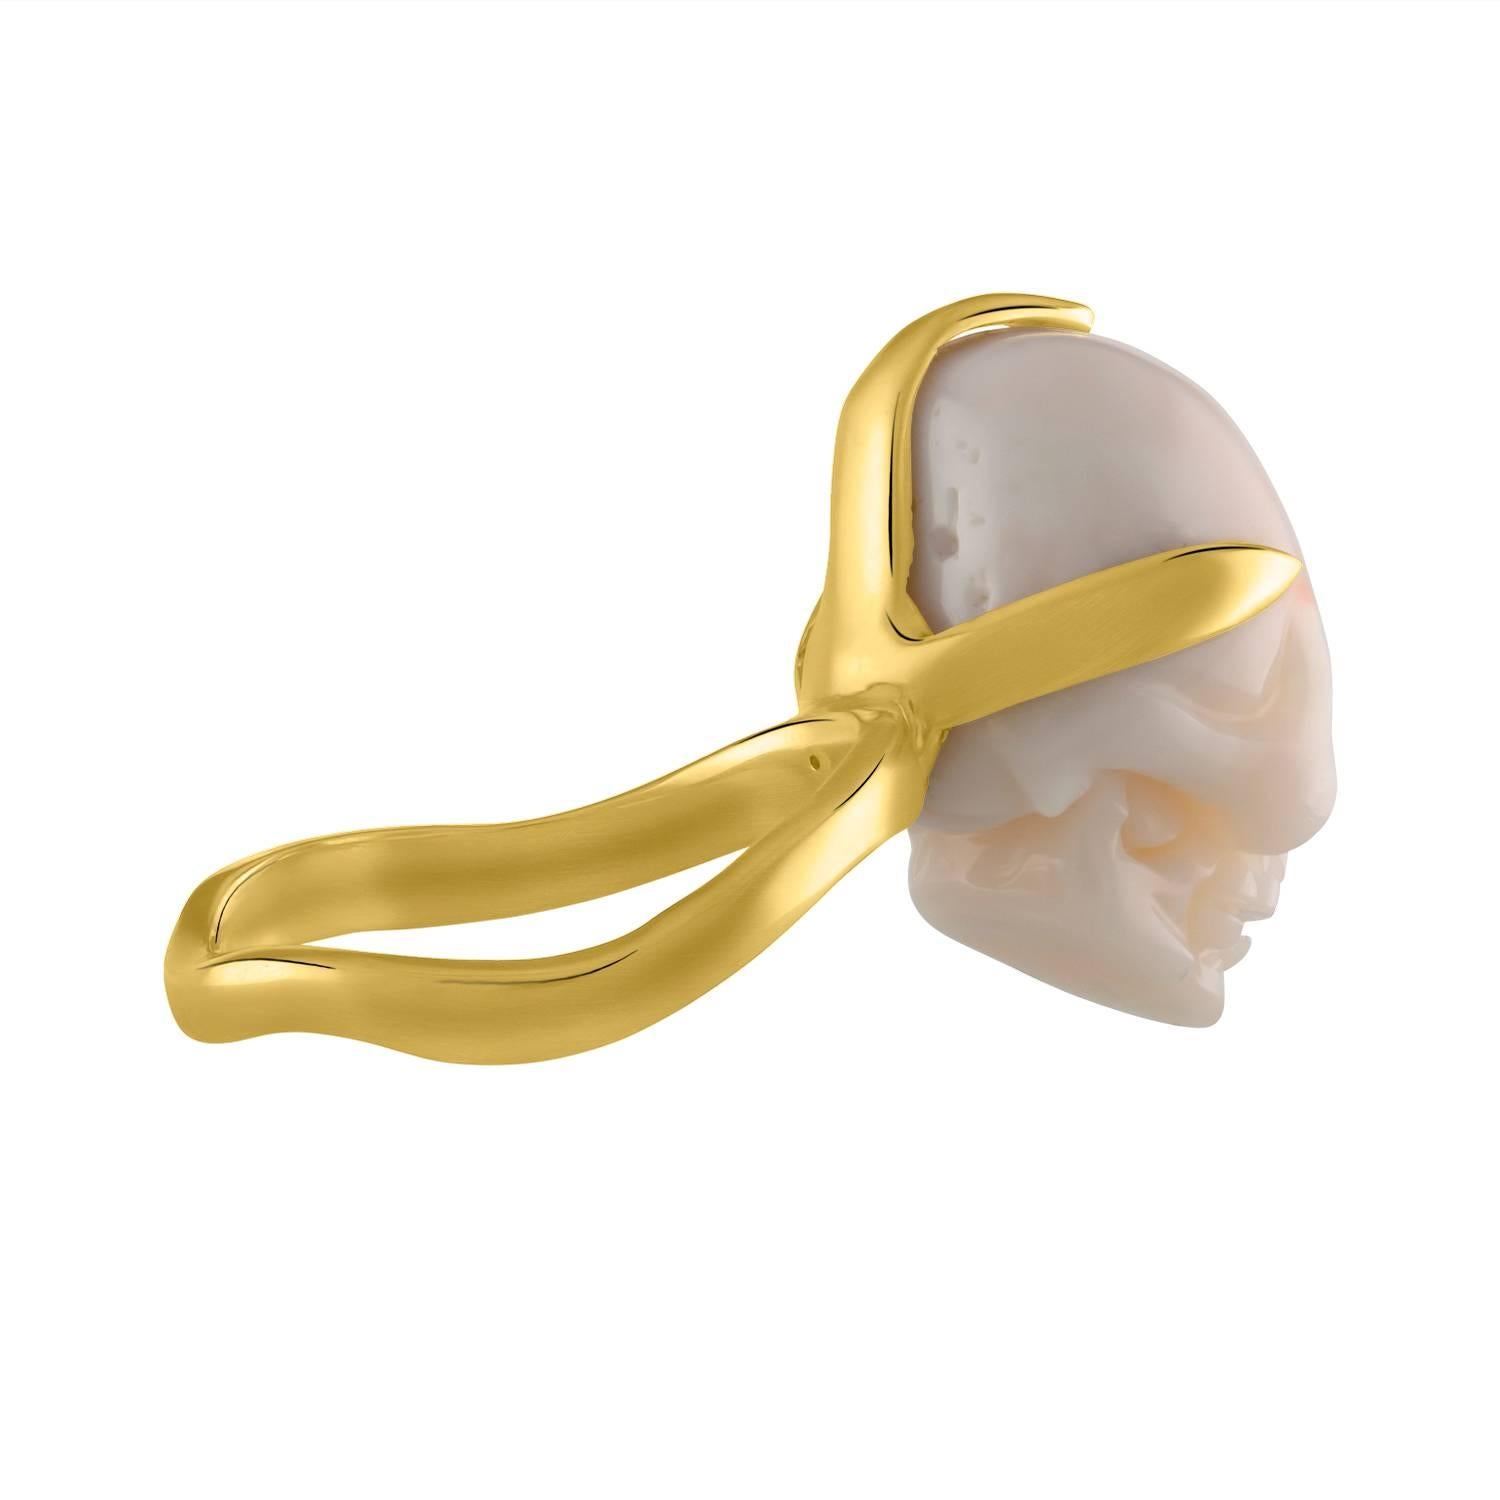 Shah & Shah handmade 18k yellow gold and hand- carved coral skull ring.

The ring is a size 6. Initial sizing is complimentary and an insurance appraisal is included with your purchase.